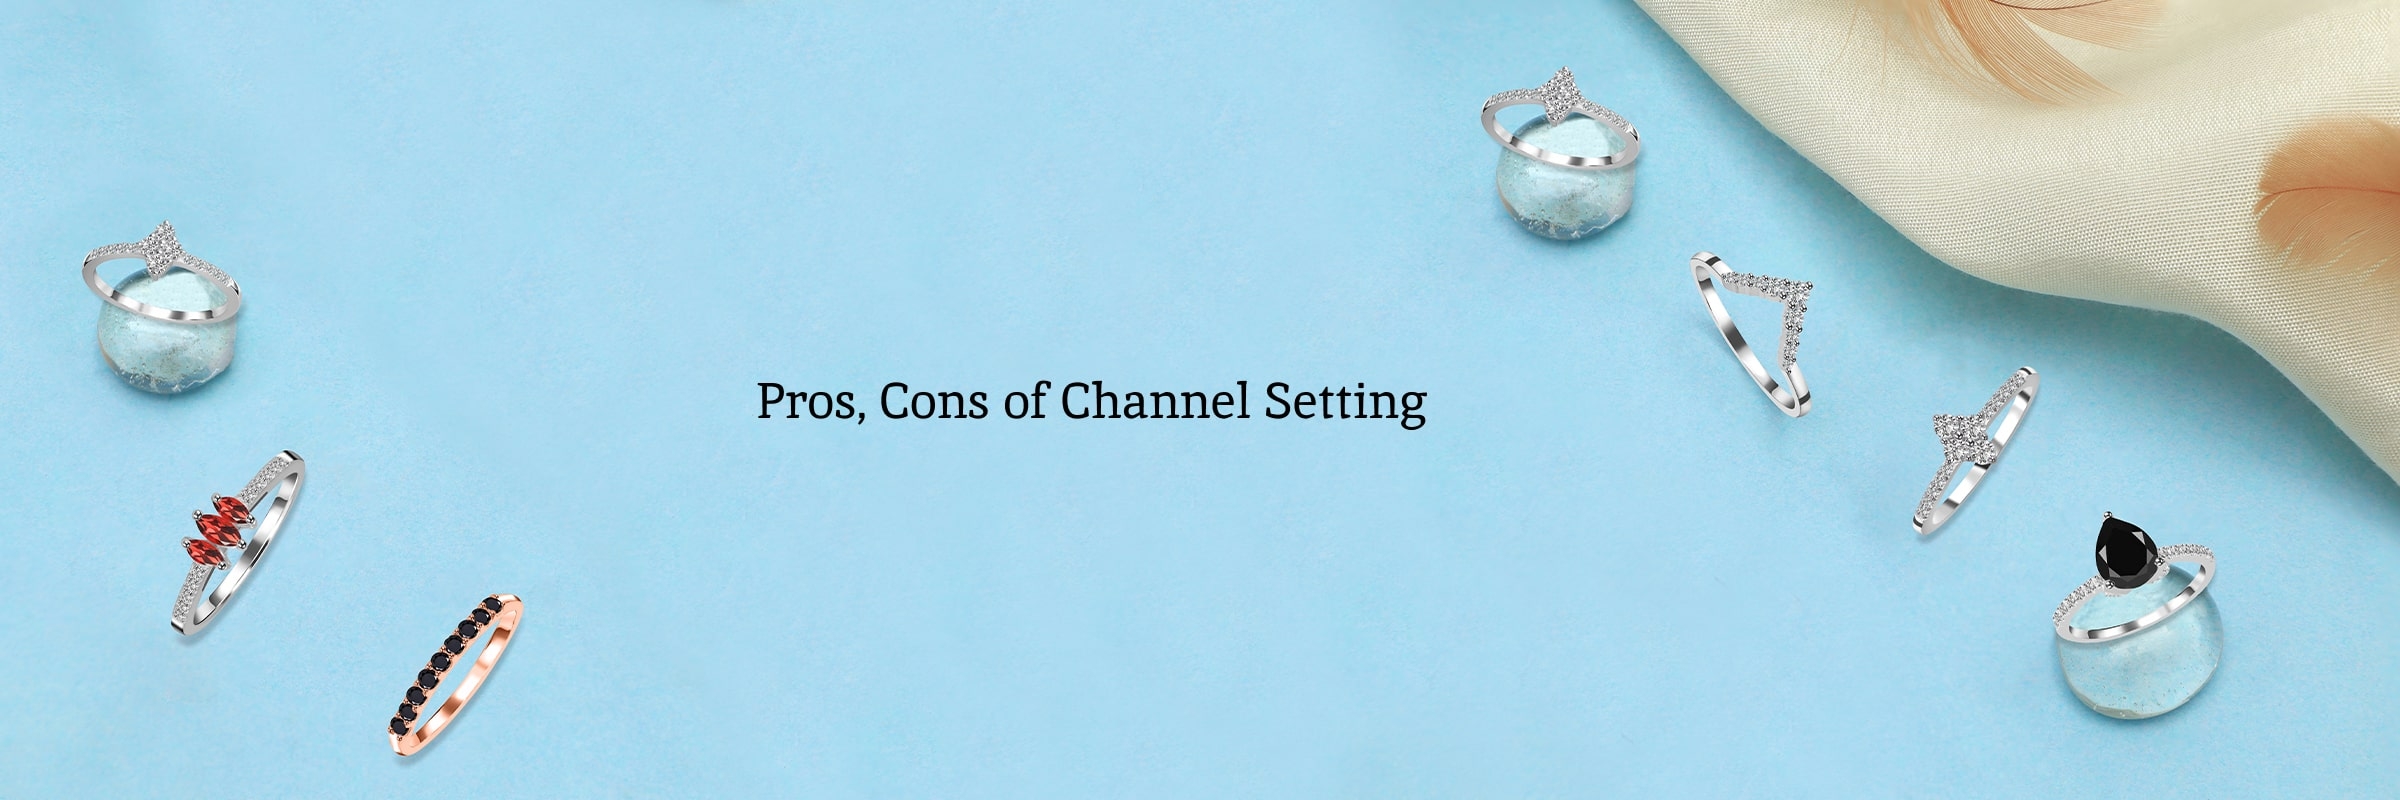 Pros and Cons of the Channel Setting